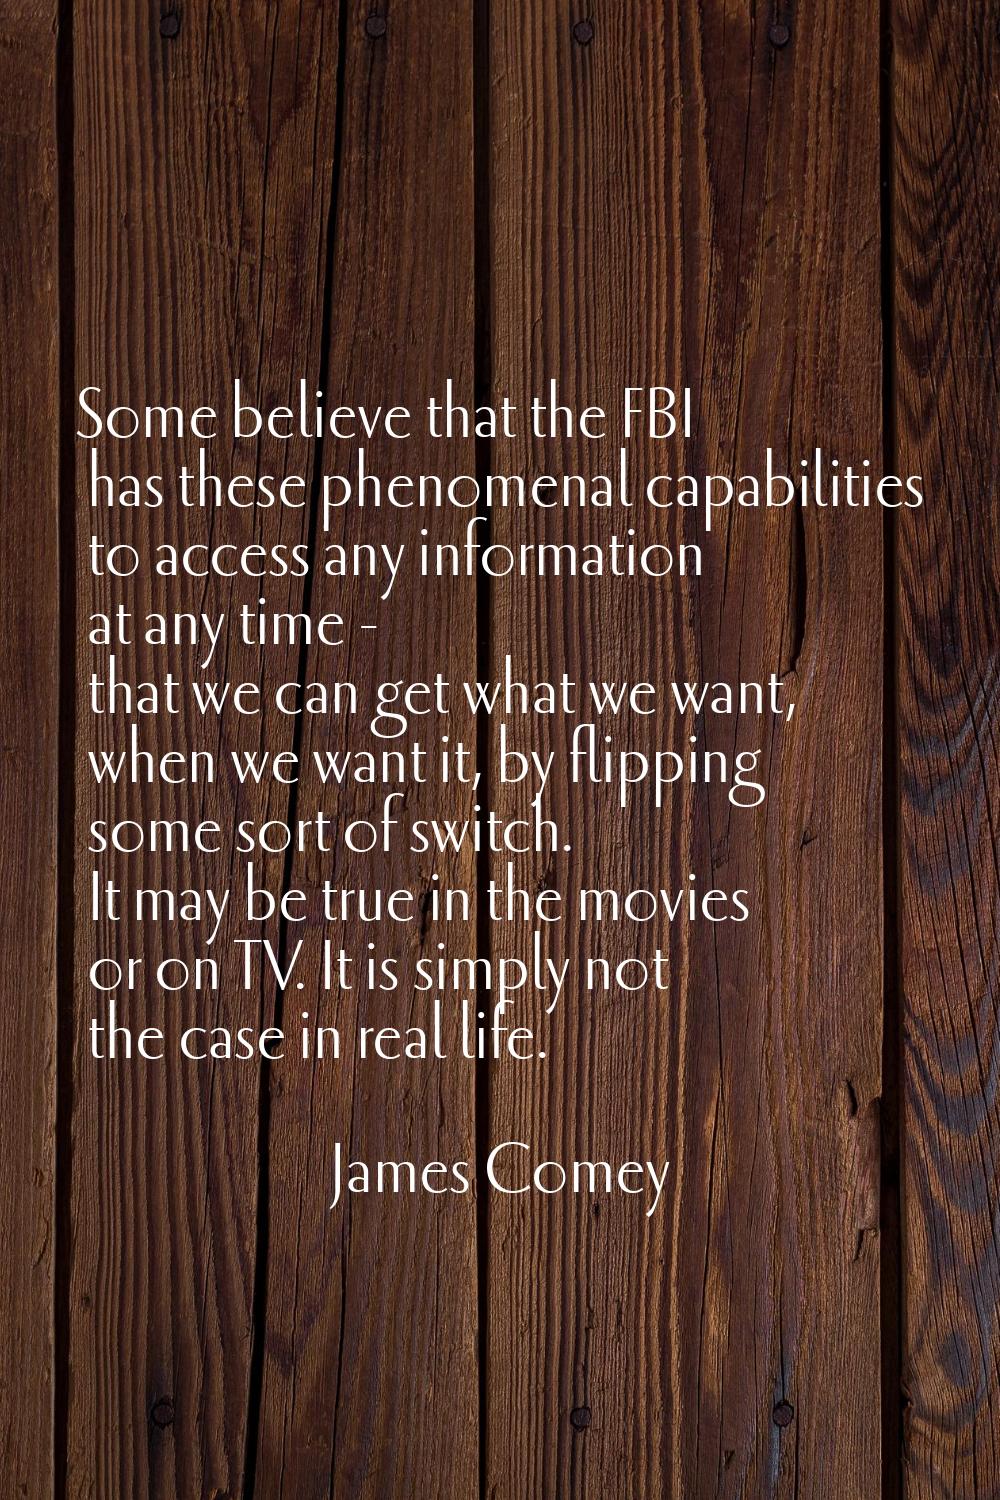 Some believe that the FBI has these phenomenal capabilities to access any information at any time -